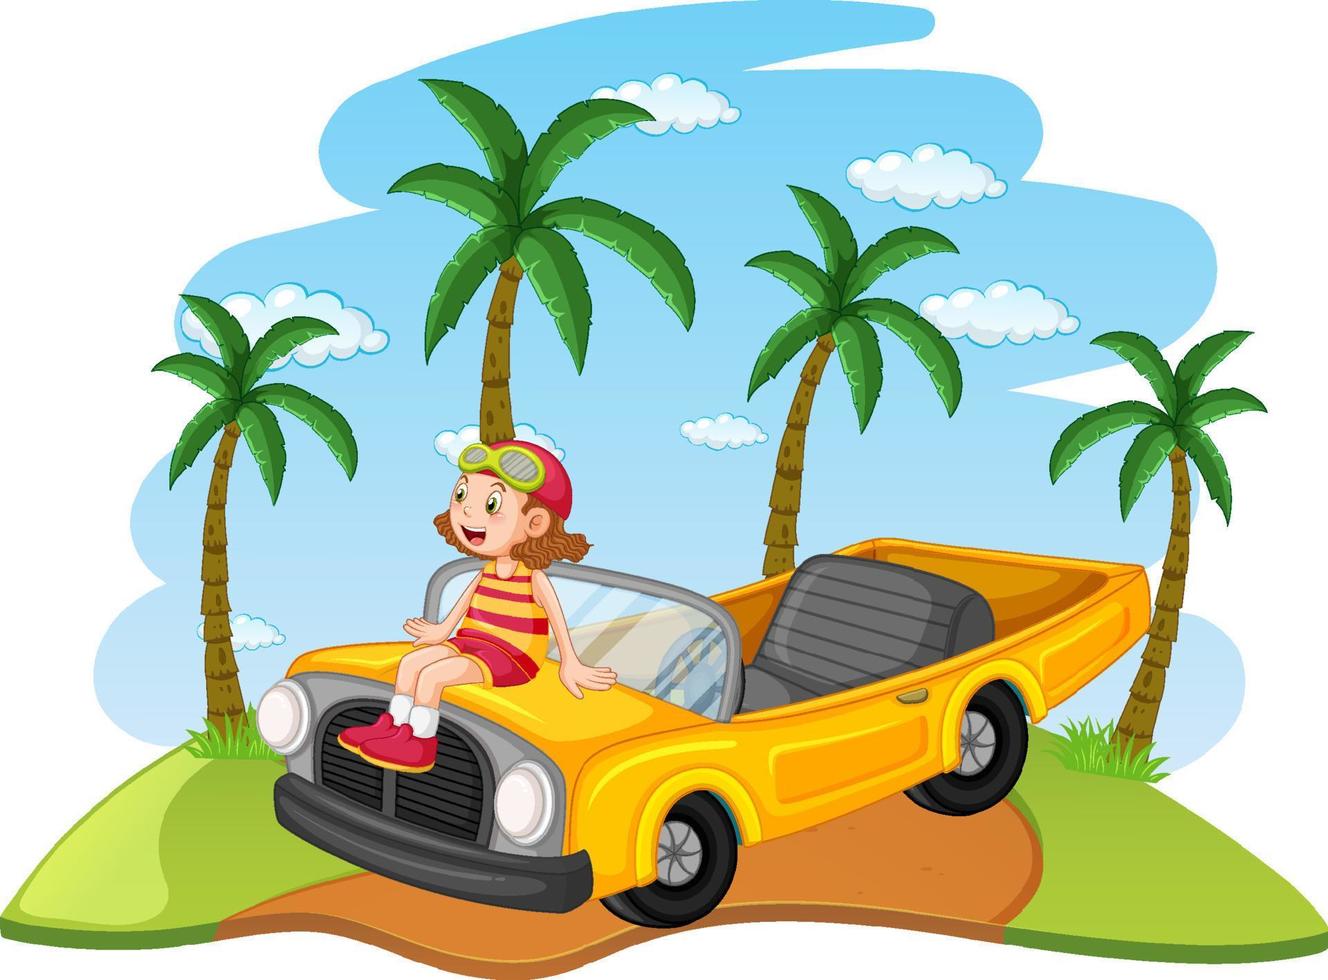 Road trip concept with kids driving classic convertible car vector